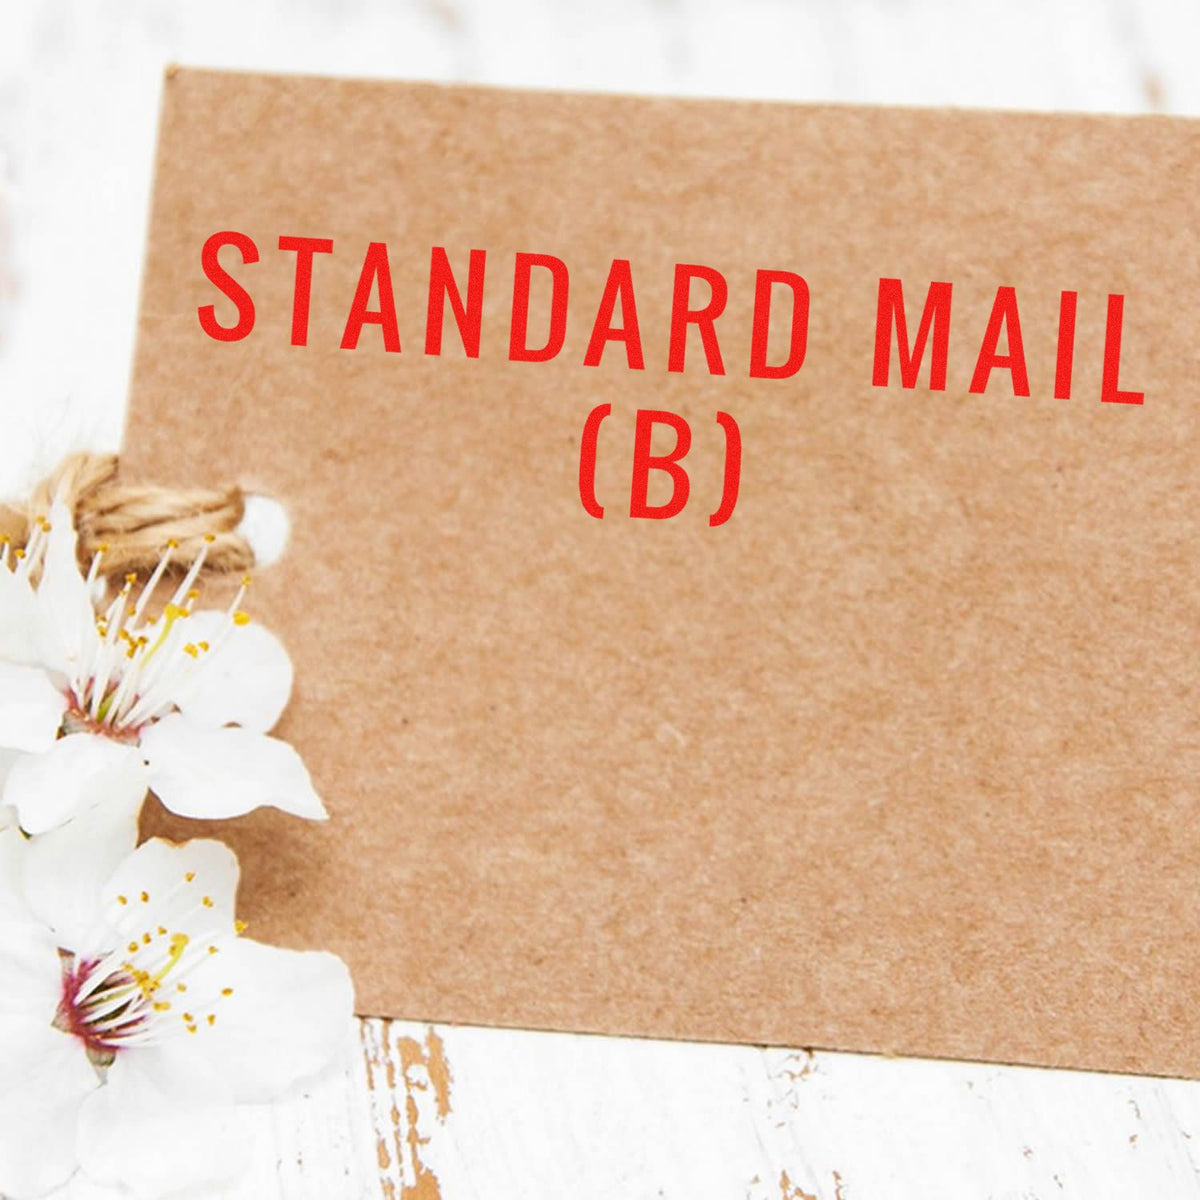 Large Standard Mail (B) Rubber Stamp In Use Photo